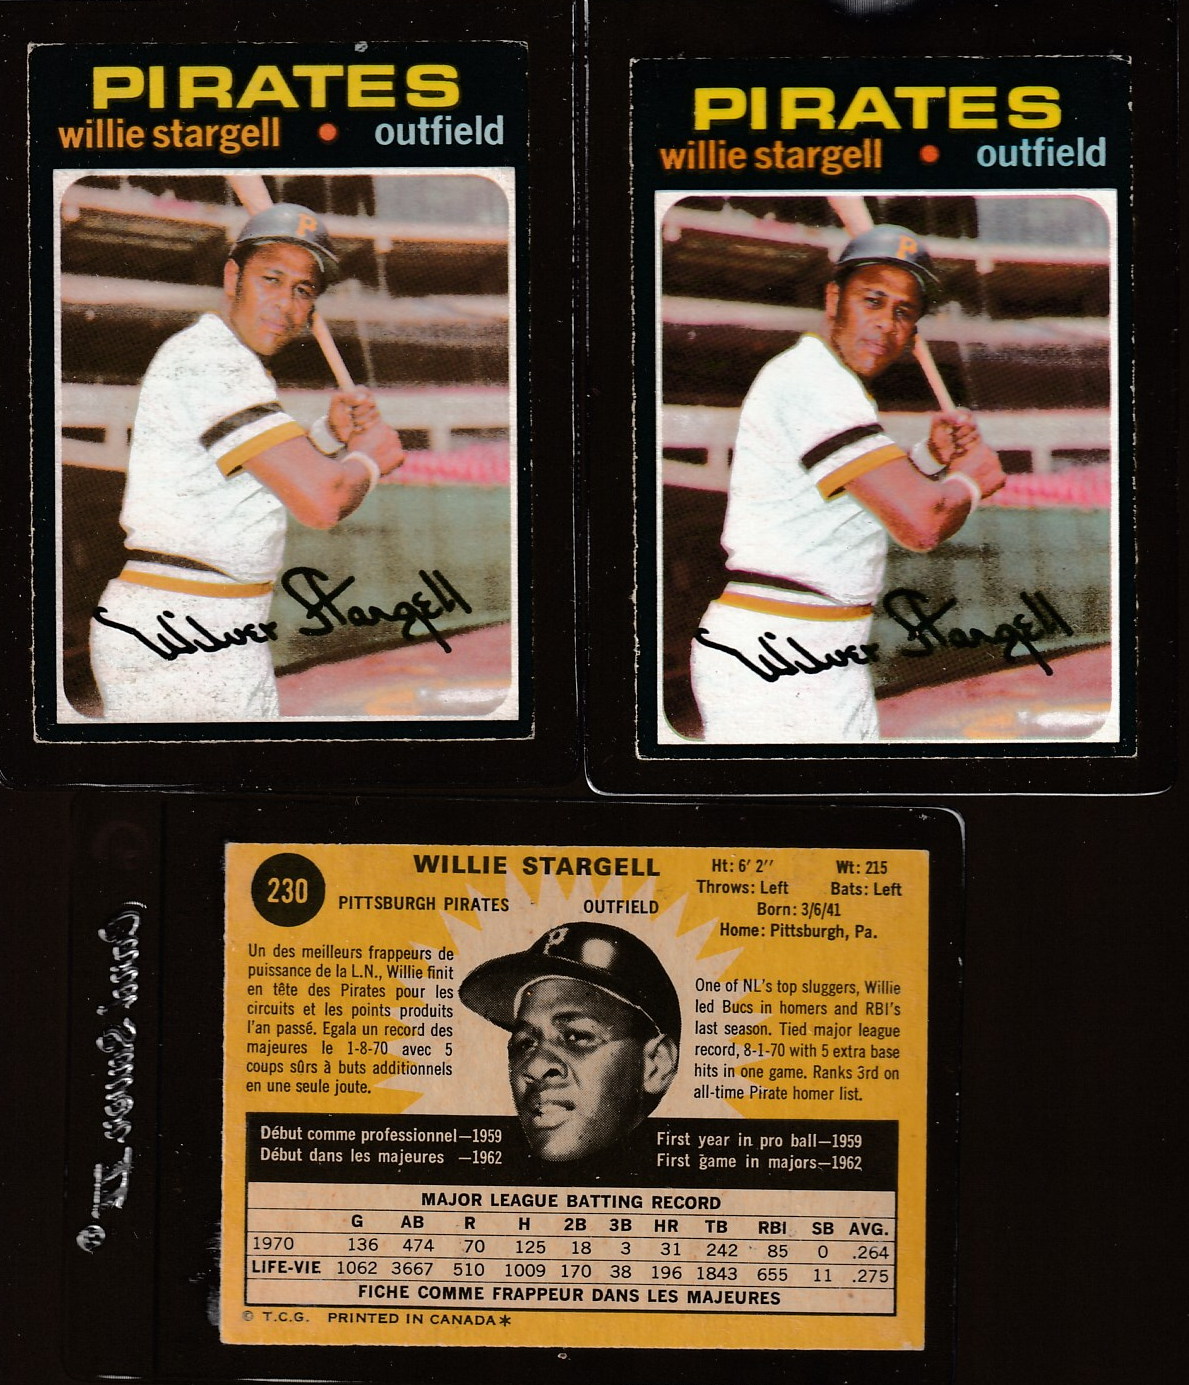 1971 O-Pee-Chee/OPC #230 Willie Stargell (Pirates) Baseball cards value